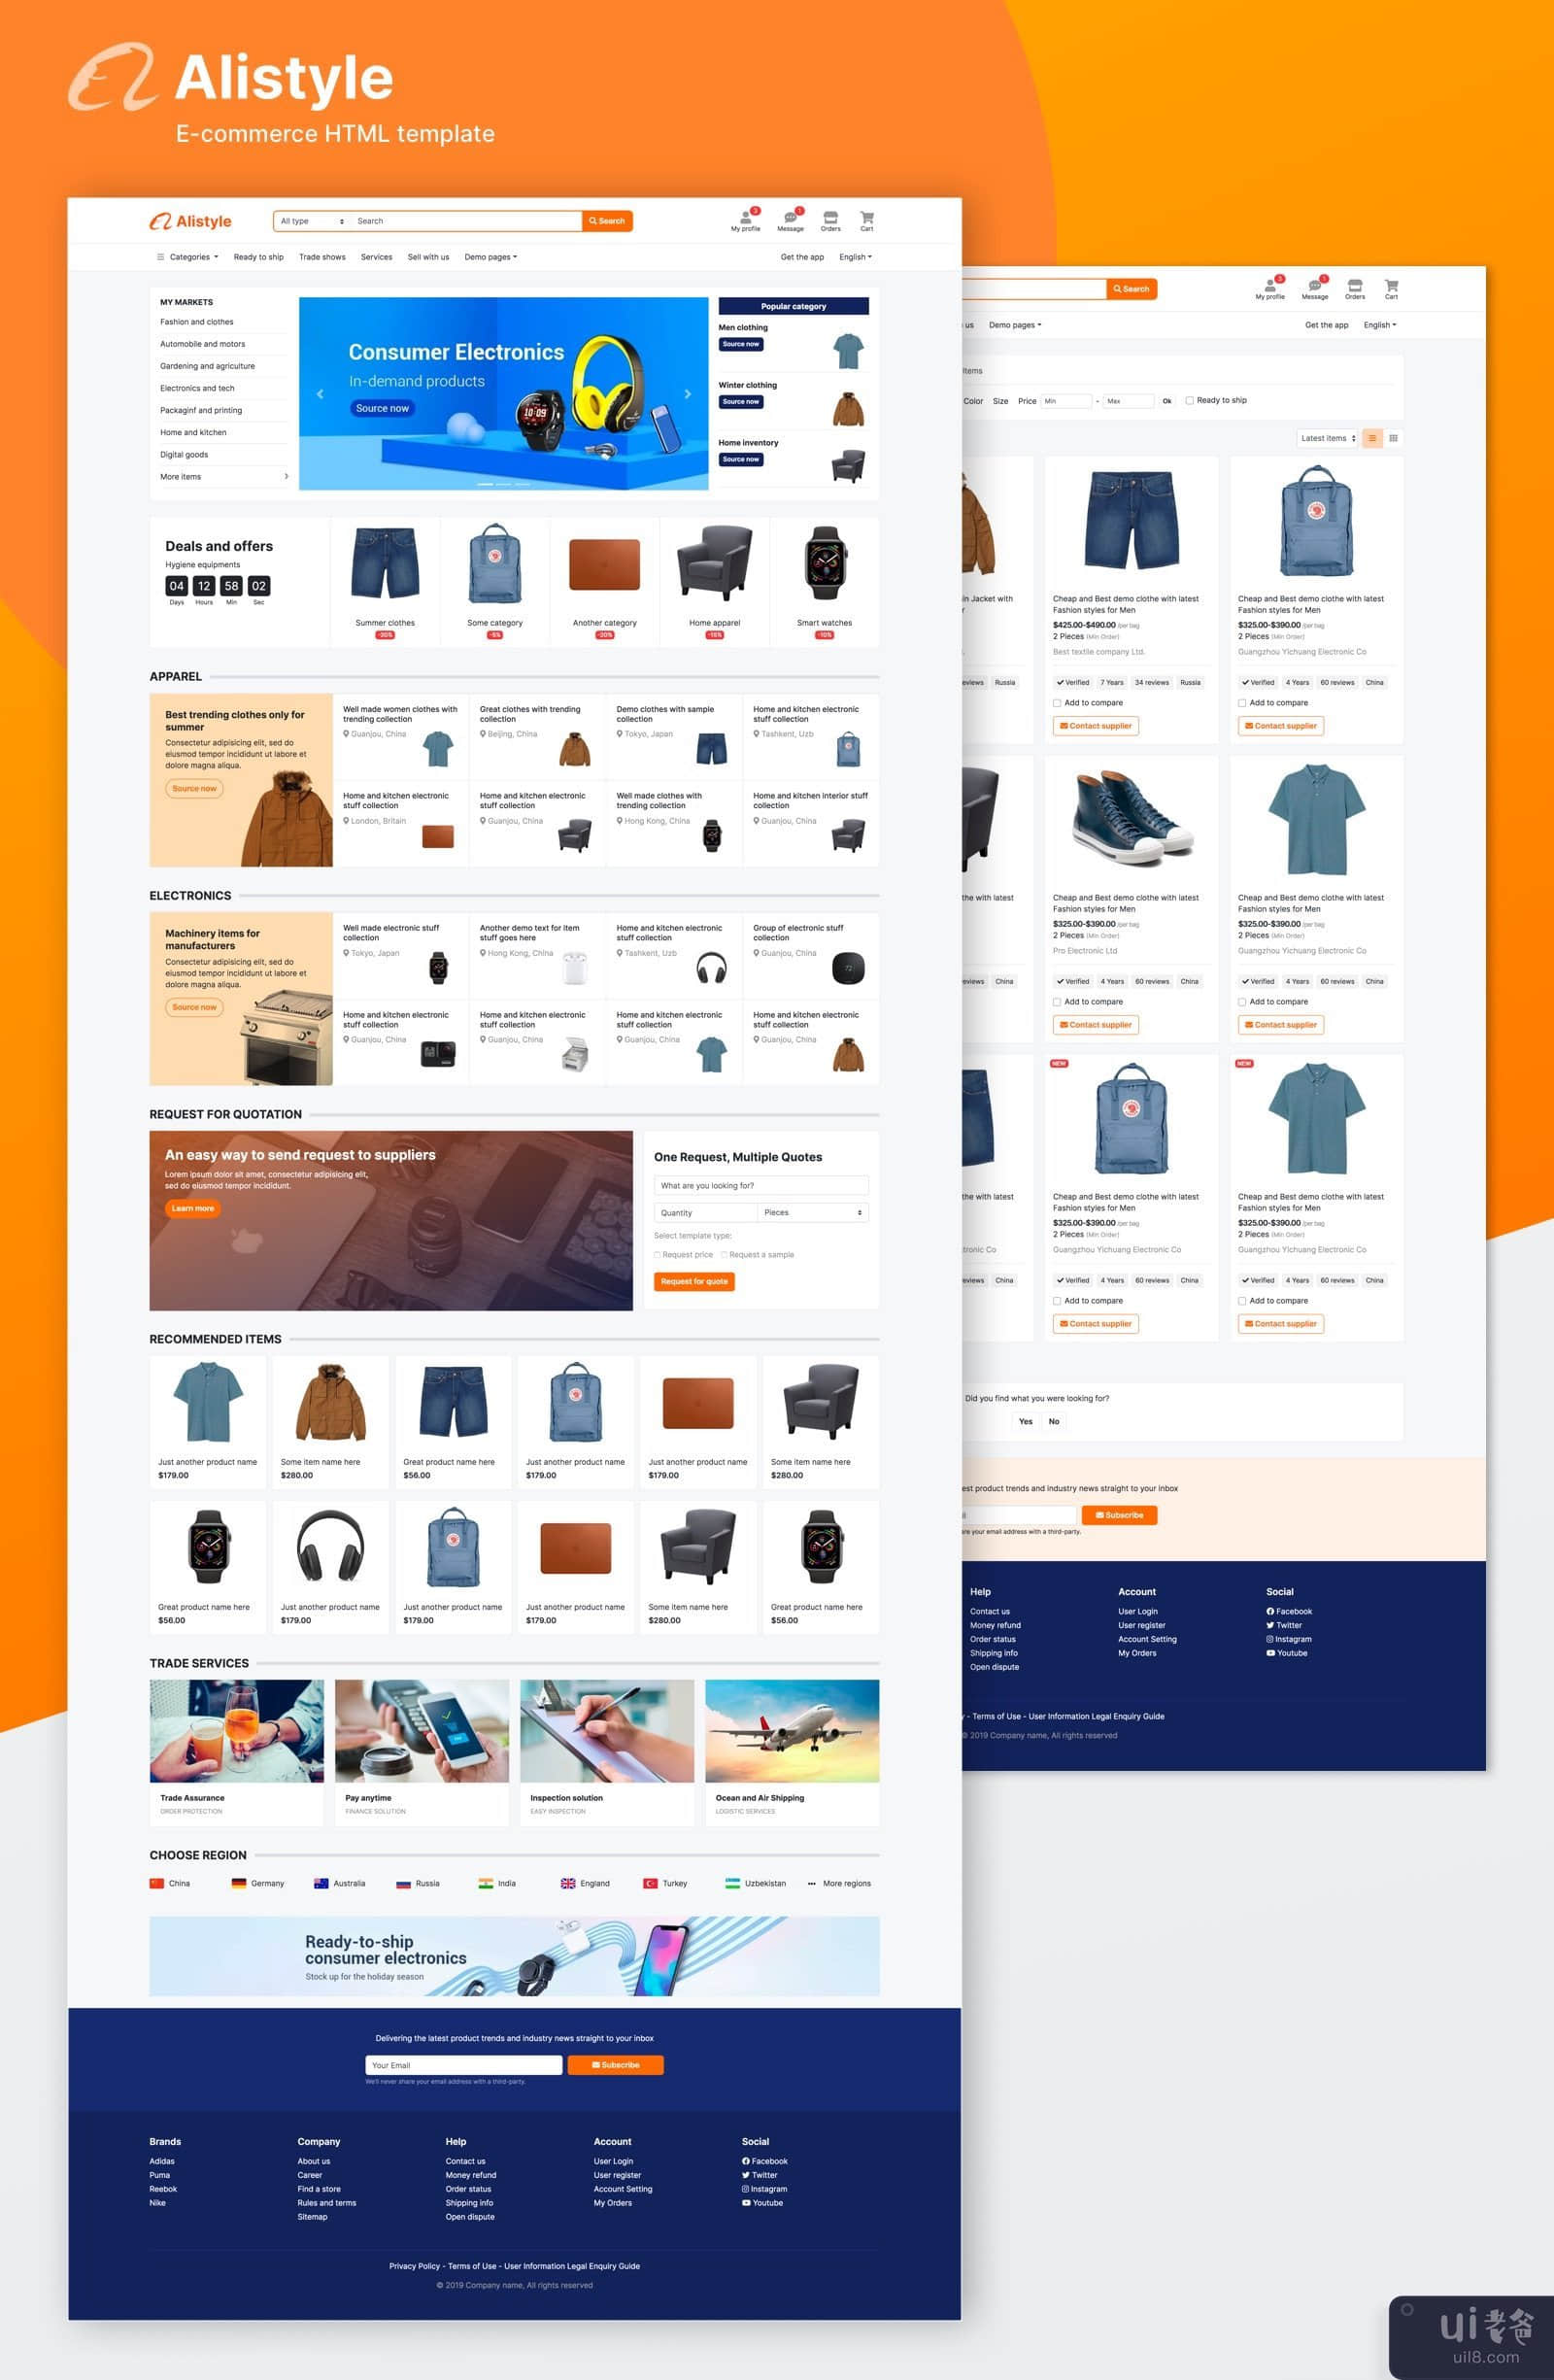 Alistyle - 多用途电子商务模板(Alistyle - Multipurpose e-commerce template)插图2